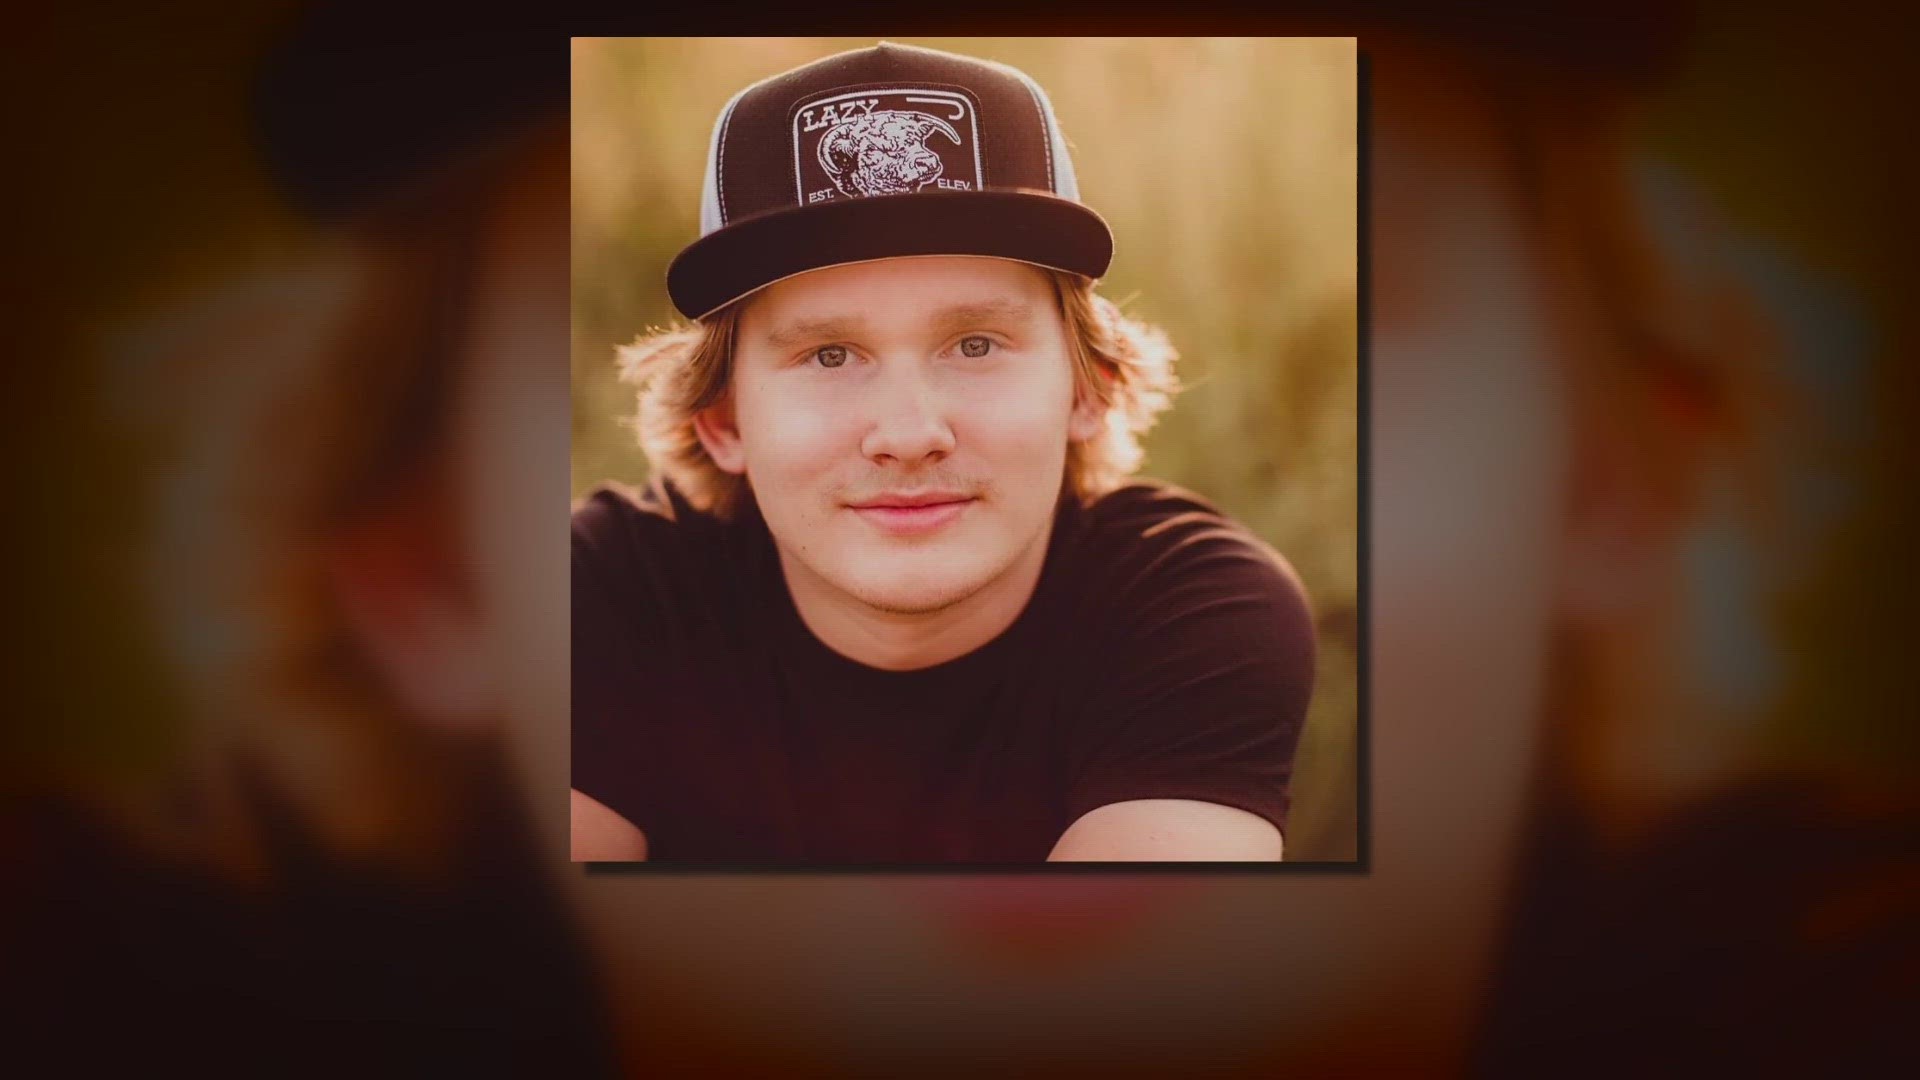 An 18-year-old was shot and killed Sunday morning while hunting ducks at the Ted Shanks Conservation Area outside of Ashburn. He was a Winfield High School senior.